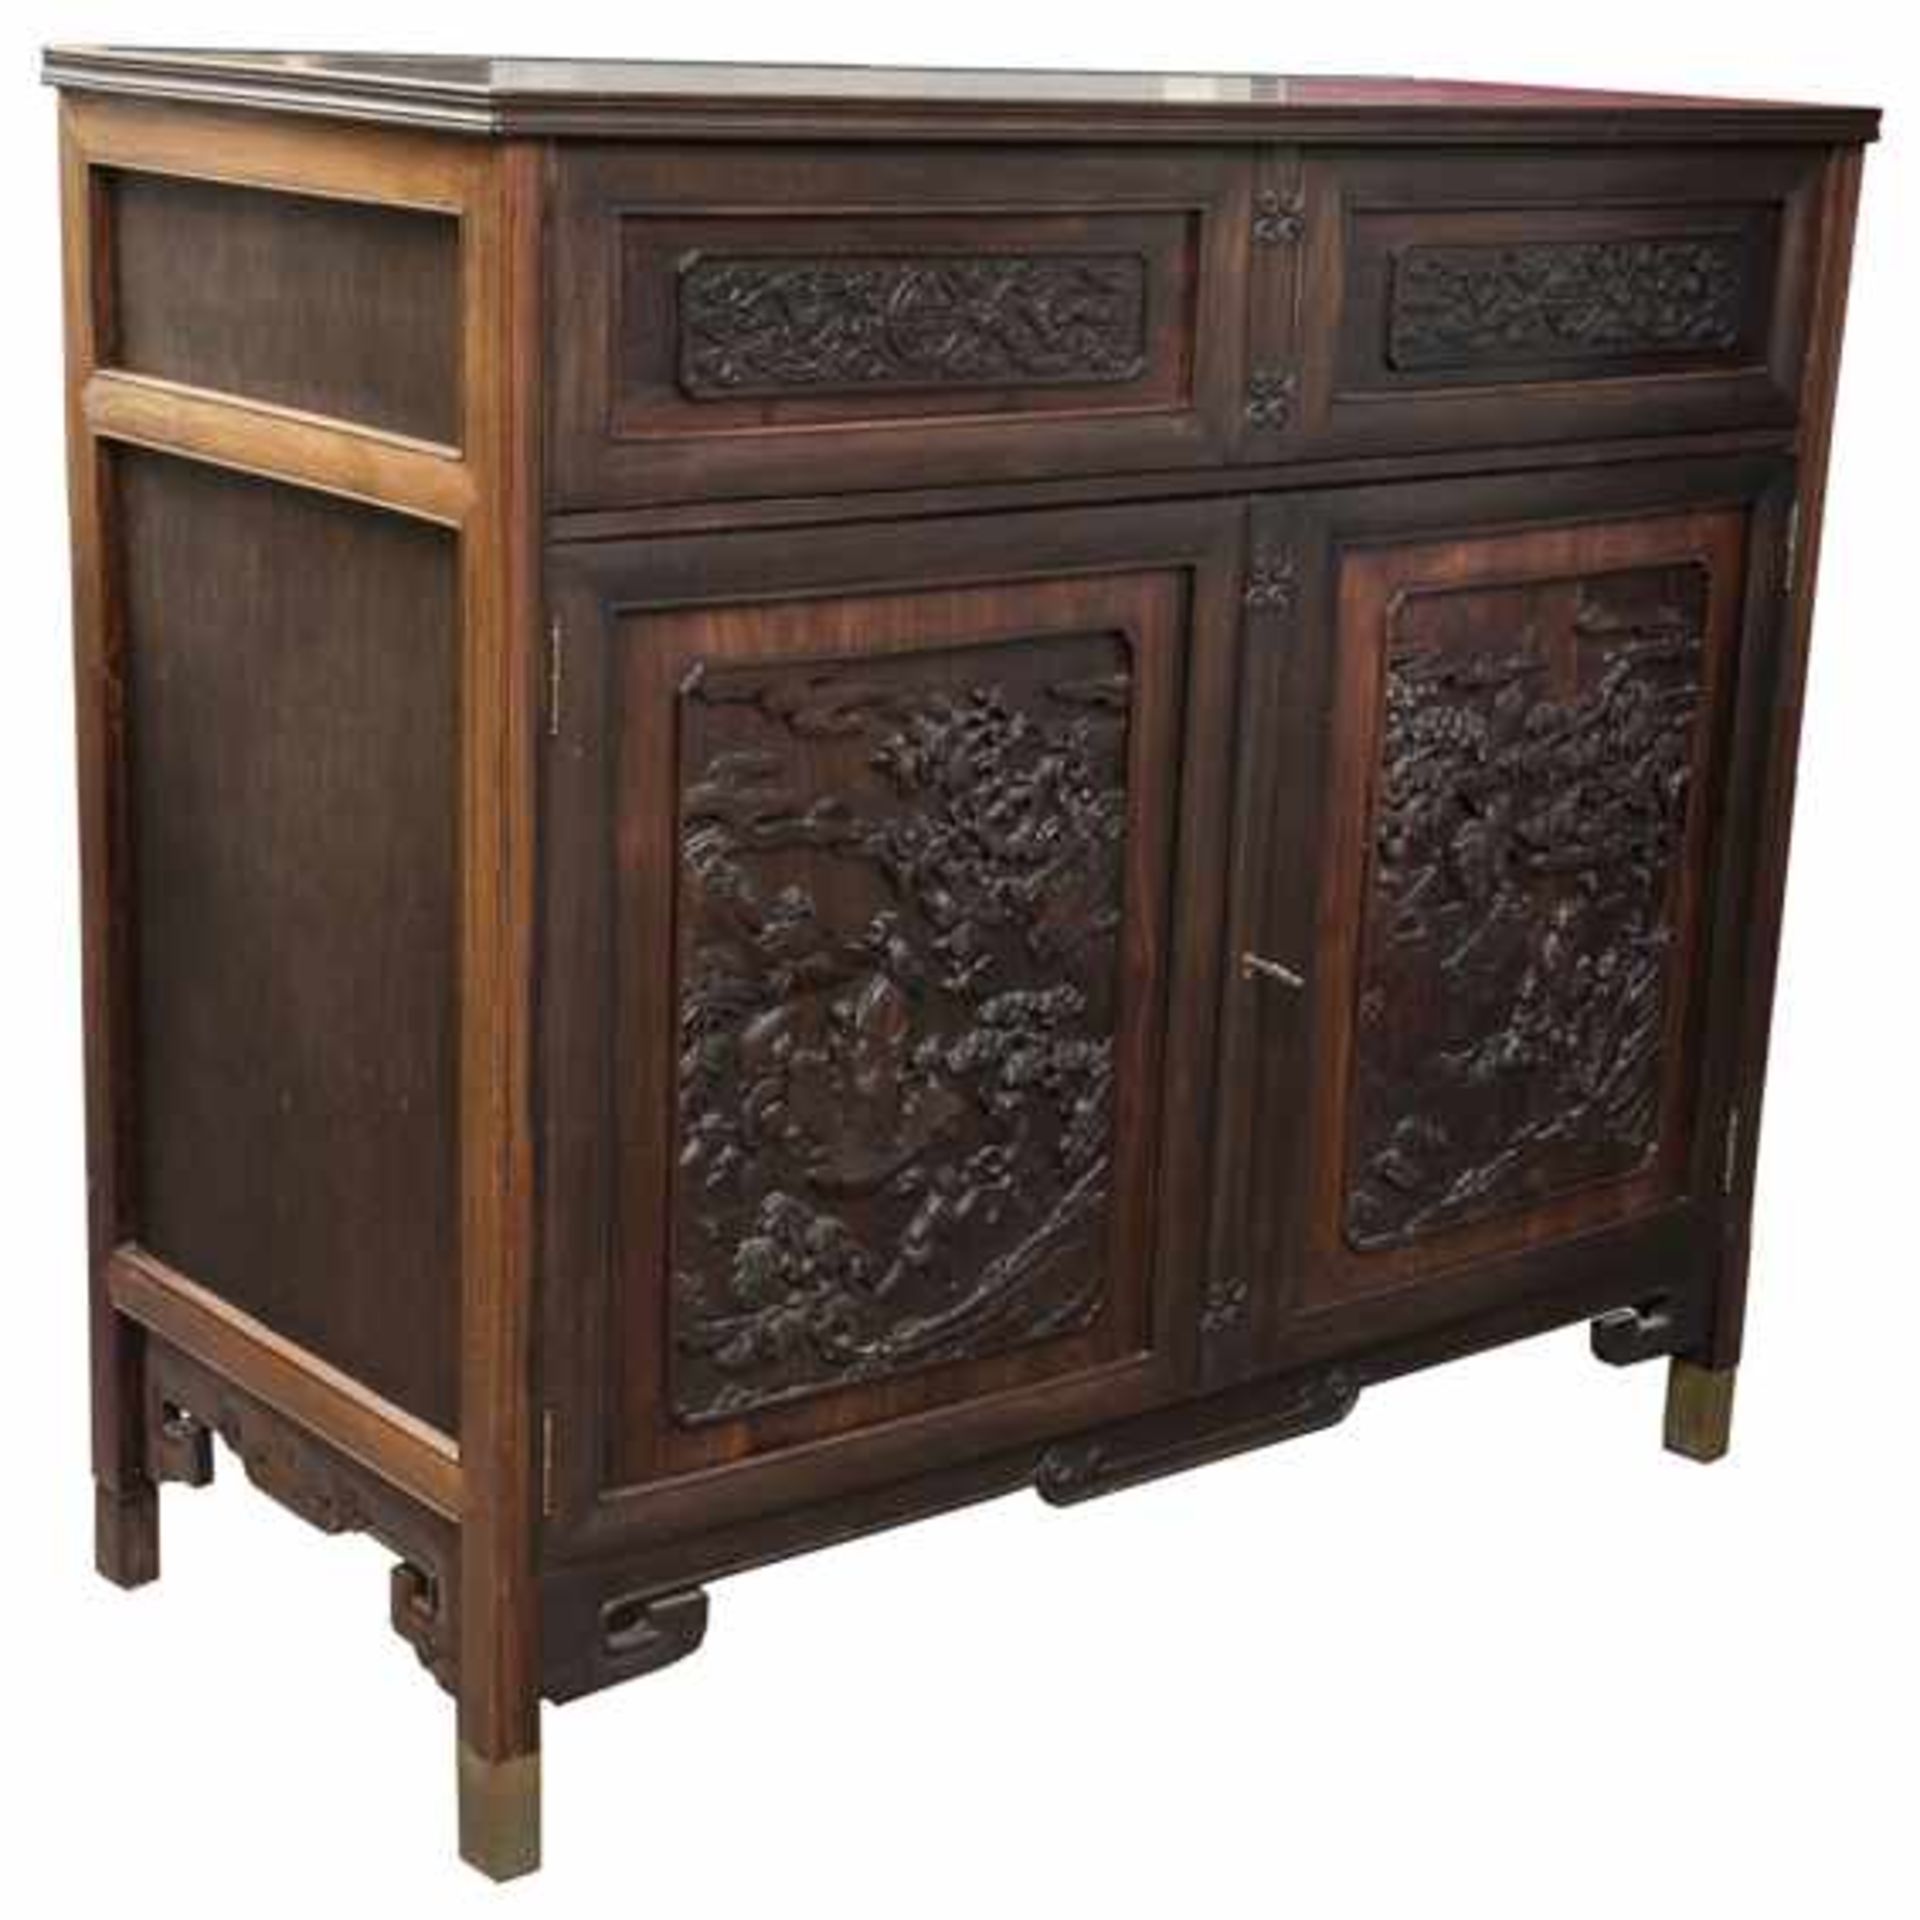 AN ELEGANT DARK HARDWOOD CABINET Hardwood, brass. China, 20th CenturyFinely carved in relief with - Image 5 of 5